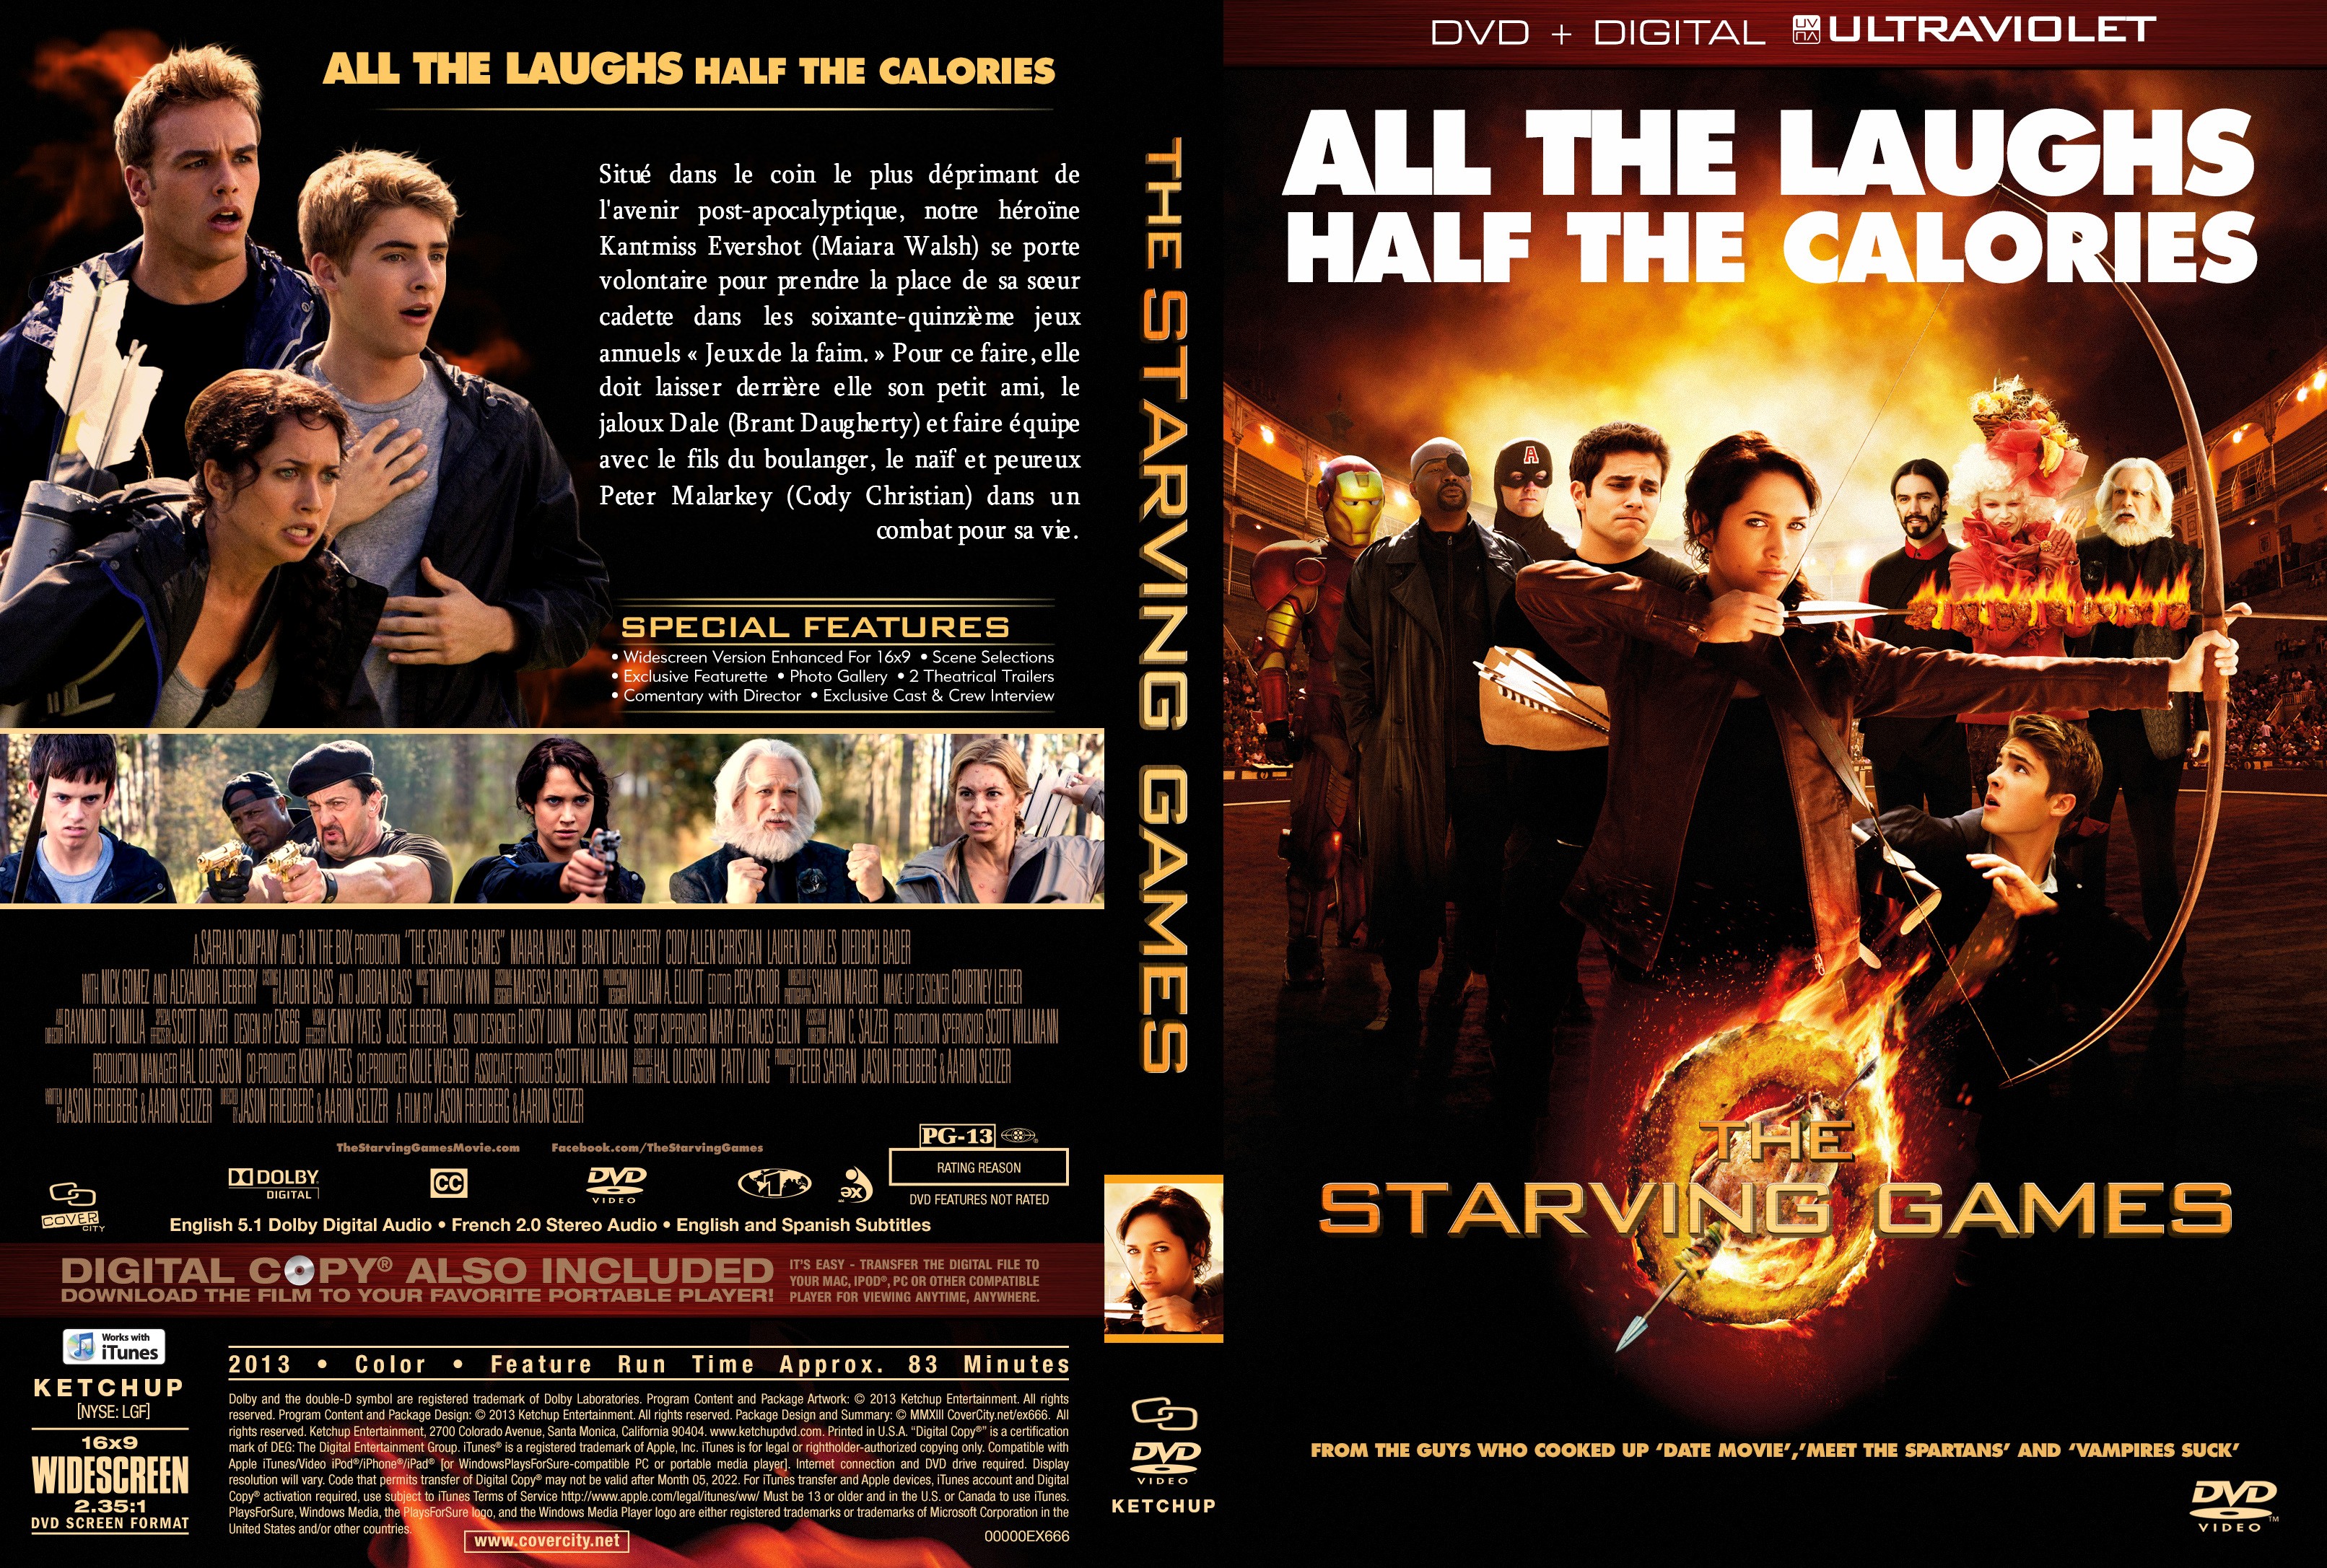 Jaquette DVD The Starving Games custom